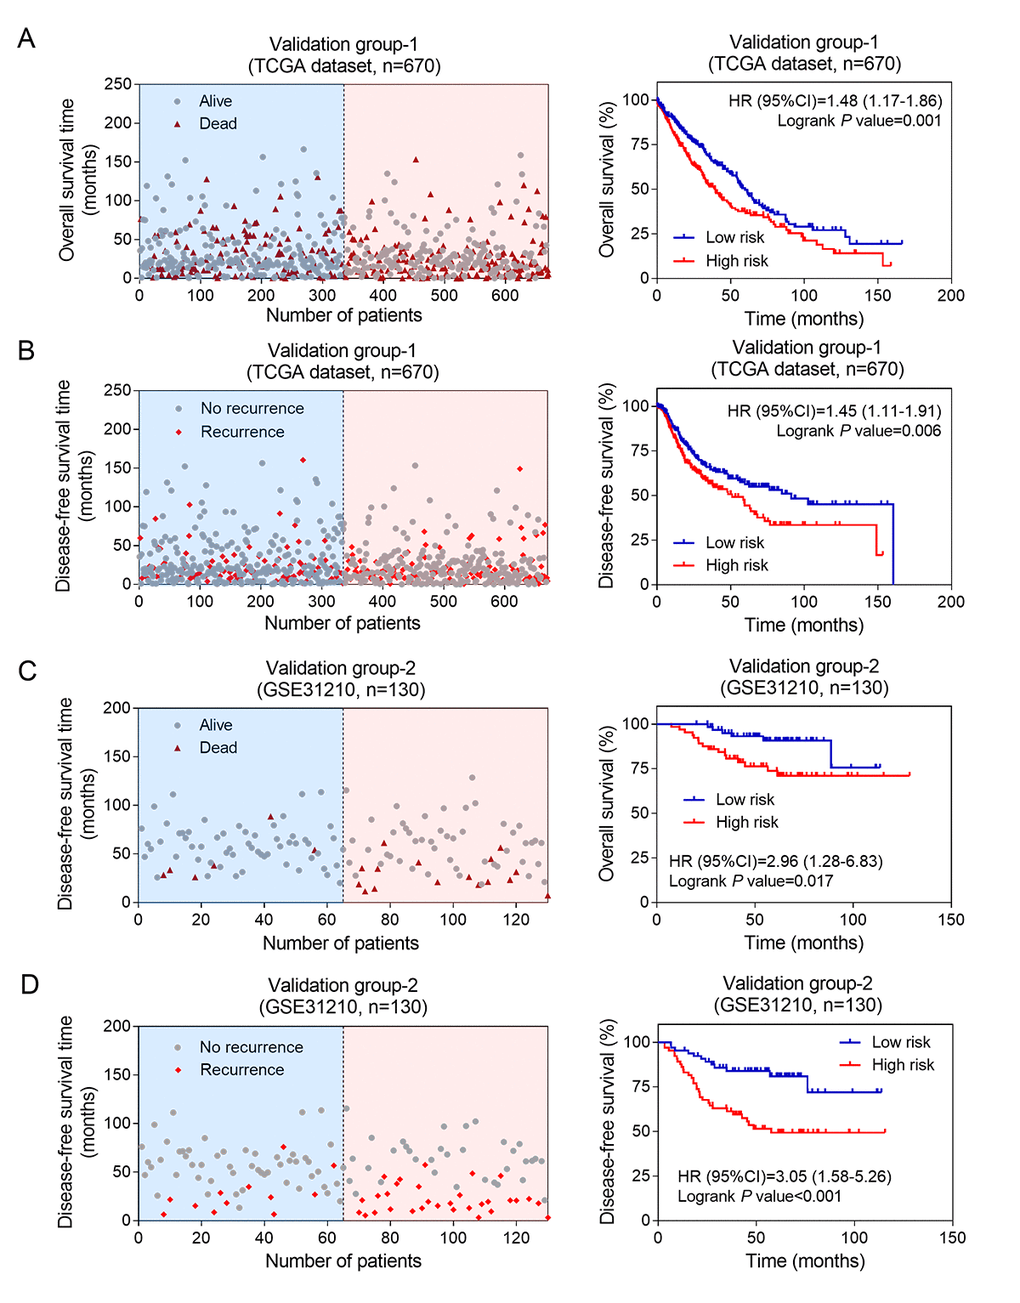 The prognostic values of eight-lncRNA signature in two independent validation groups. Kaplan-Meier analysis indicated that patients in the high-risk (n = 335) subgroup exhibited significantly poorer OS (A) and DFS (B) than the low-risk subgroup (n = 335) in validation group-1; Kaplan-Meier analysis indicated that patients in the high-risk (n = 335) subgroup exhibited significantly poorer OS (C) and DFS (D) than the low-risk subgroup (n = 335) in validation group-2. The left side shows the distribution of risk scores based on eight-lncRNA in corresponding survival status and recurrence in the two validation groups.